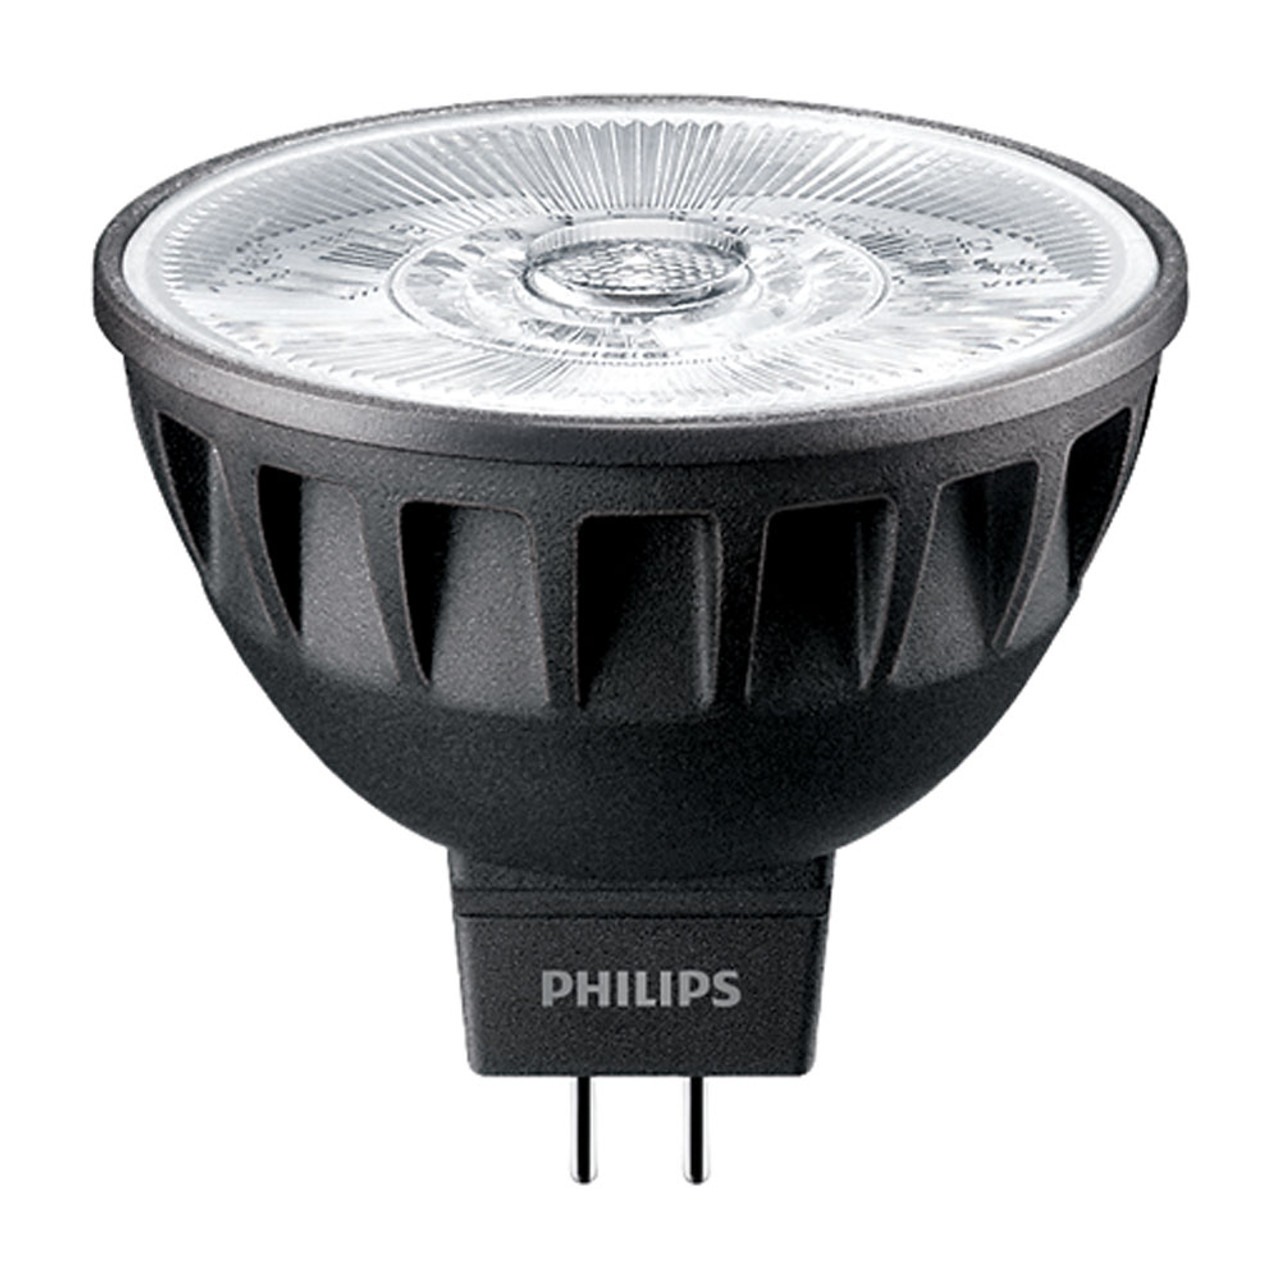 Philips Master LED 12V 6.7W (35W) Very Warm White 24 Degrees Dimmable RA97